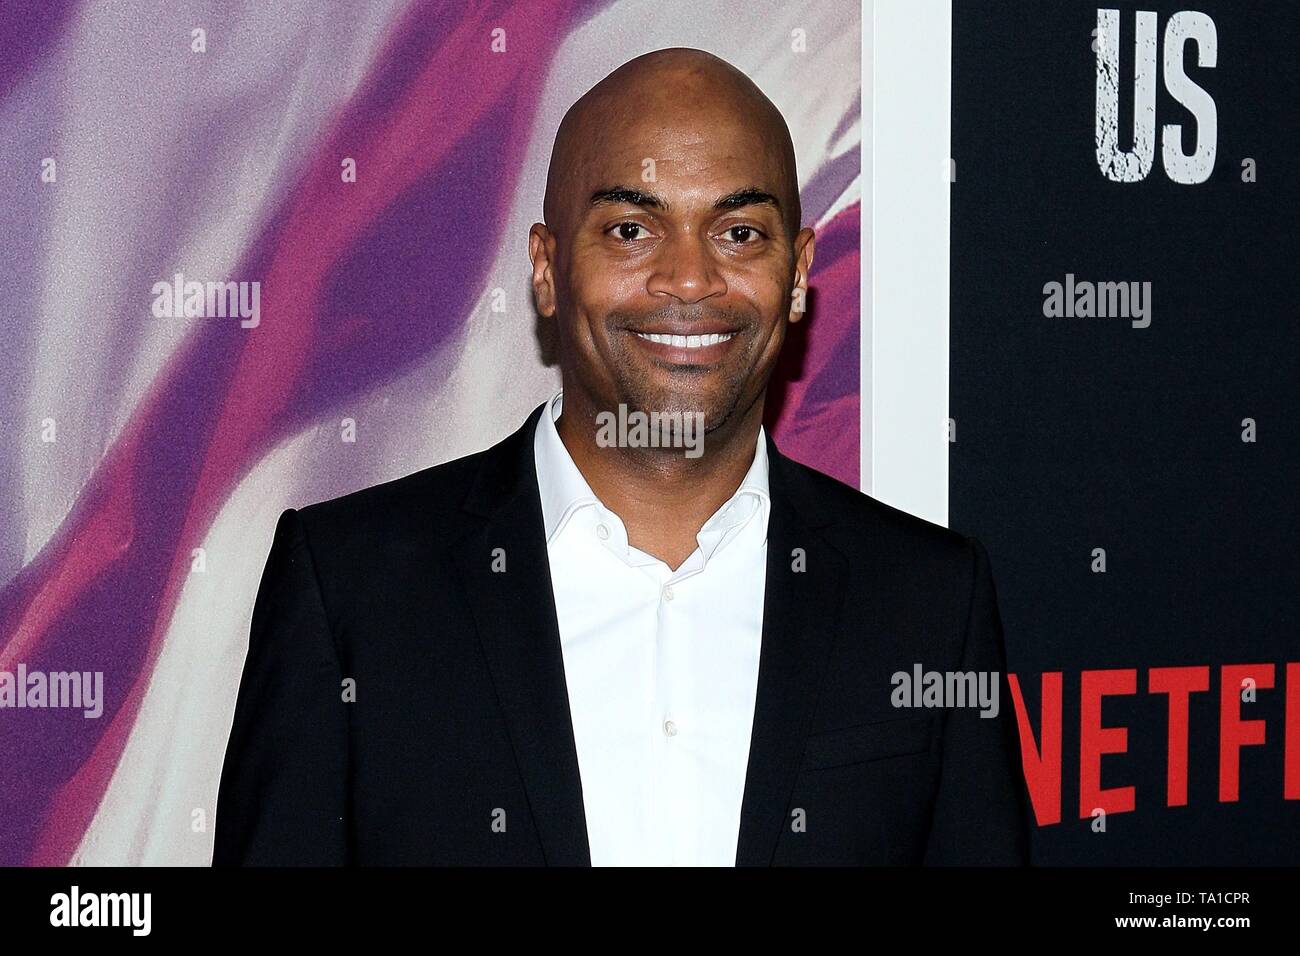 New York, NY, USA. 20th May, 2019. Andrew Stewart-Jones at arrivals for WHEN THEY SEE US World Premiere, The Apollo Theater, New York, NY May 20, 2019. Credit: Steve Mack/Everett Collection/Alamy Live News Stock Photo